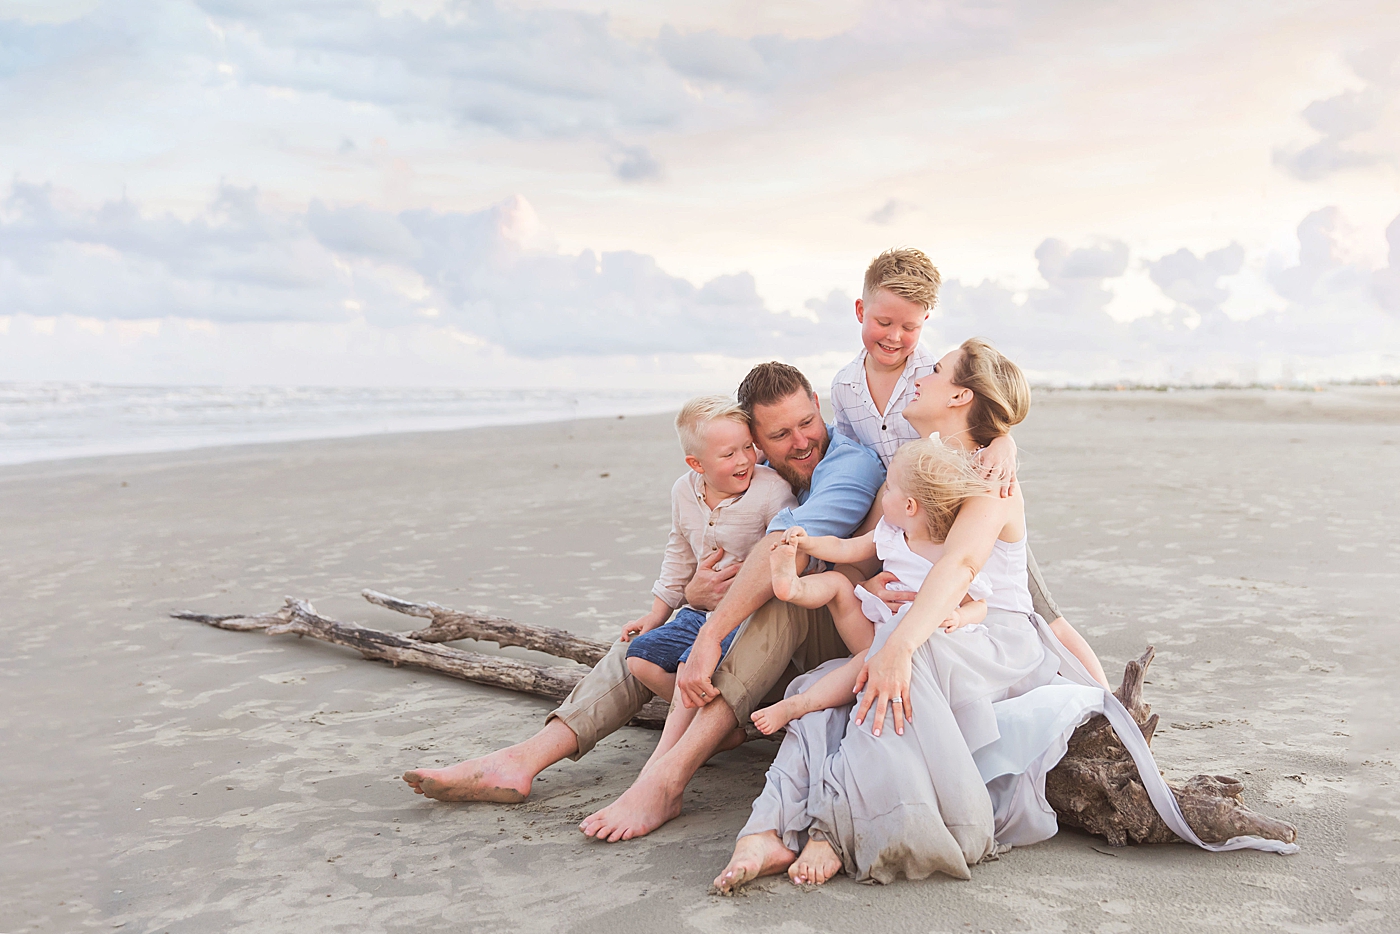 Family sitting on driftwood during photoshoot on the beach in Galveston. Photo by Fresh Light Photography